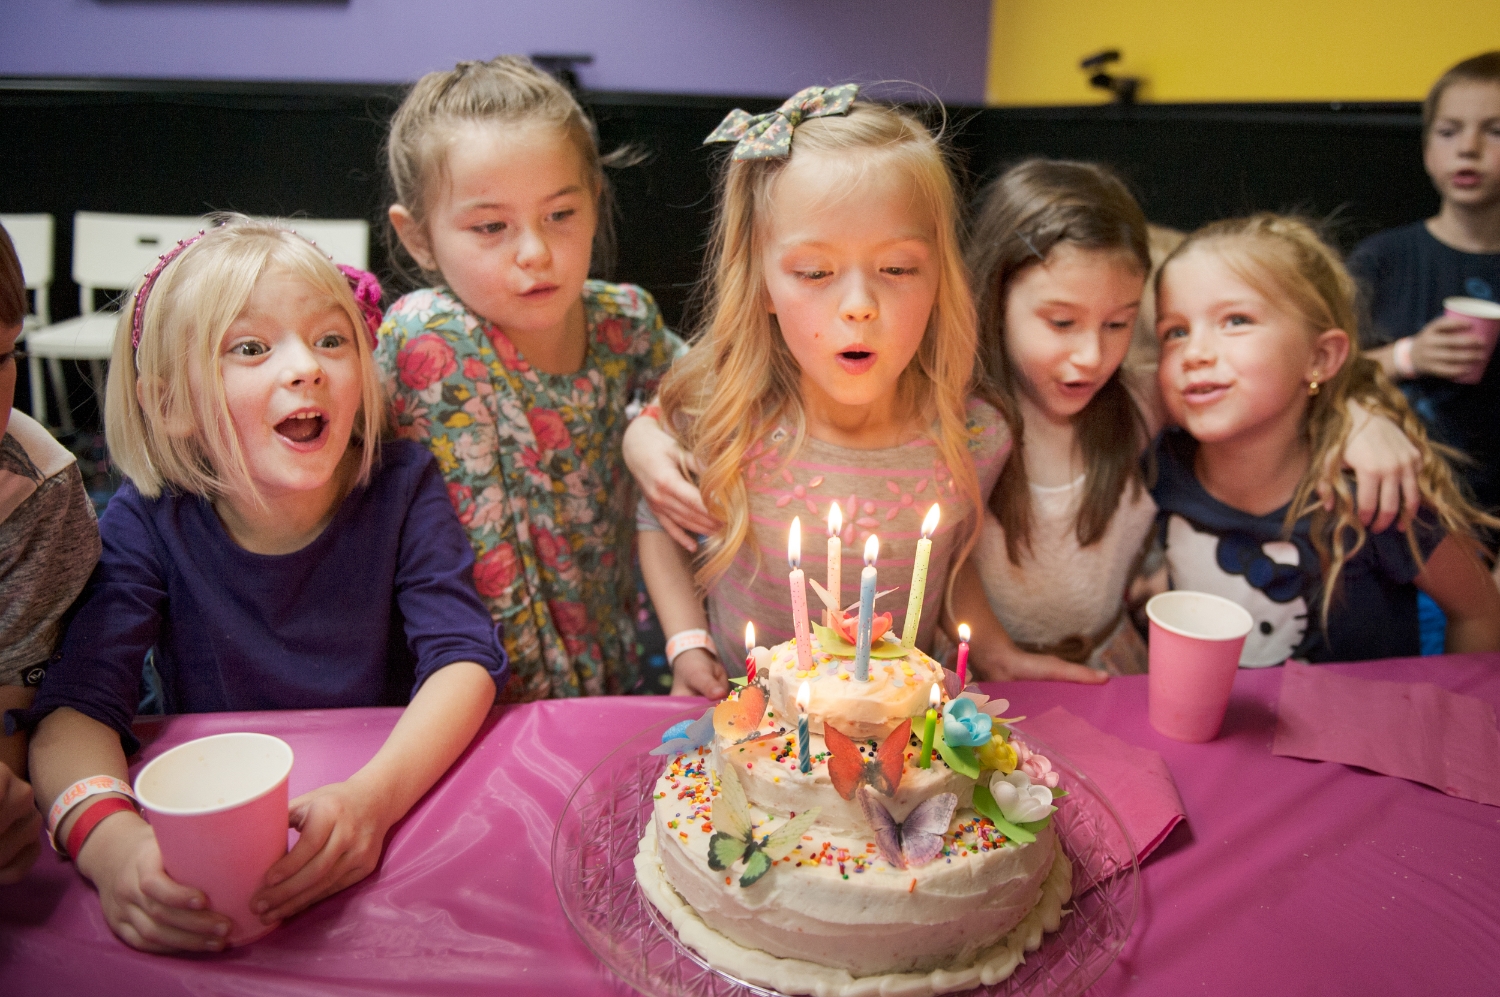  party gathers around as the birthday girl blows out the candles on her birthday cake 